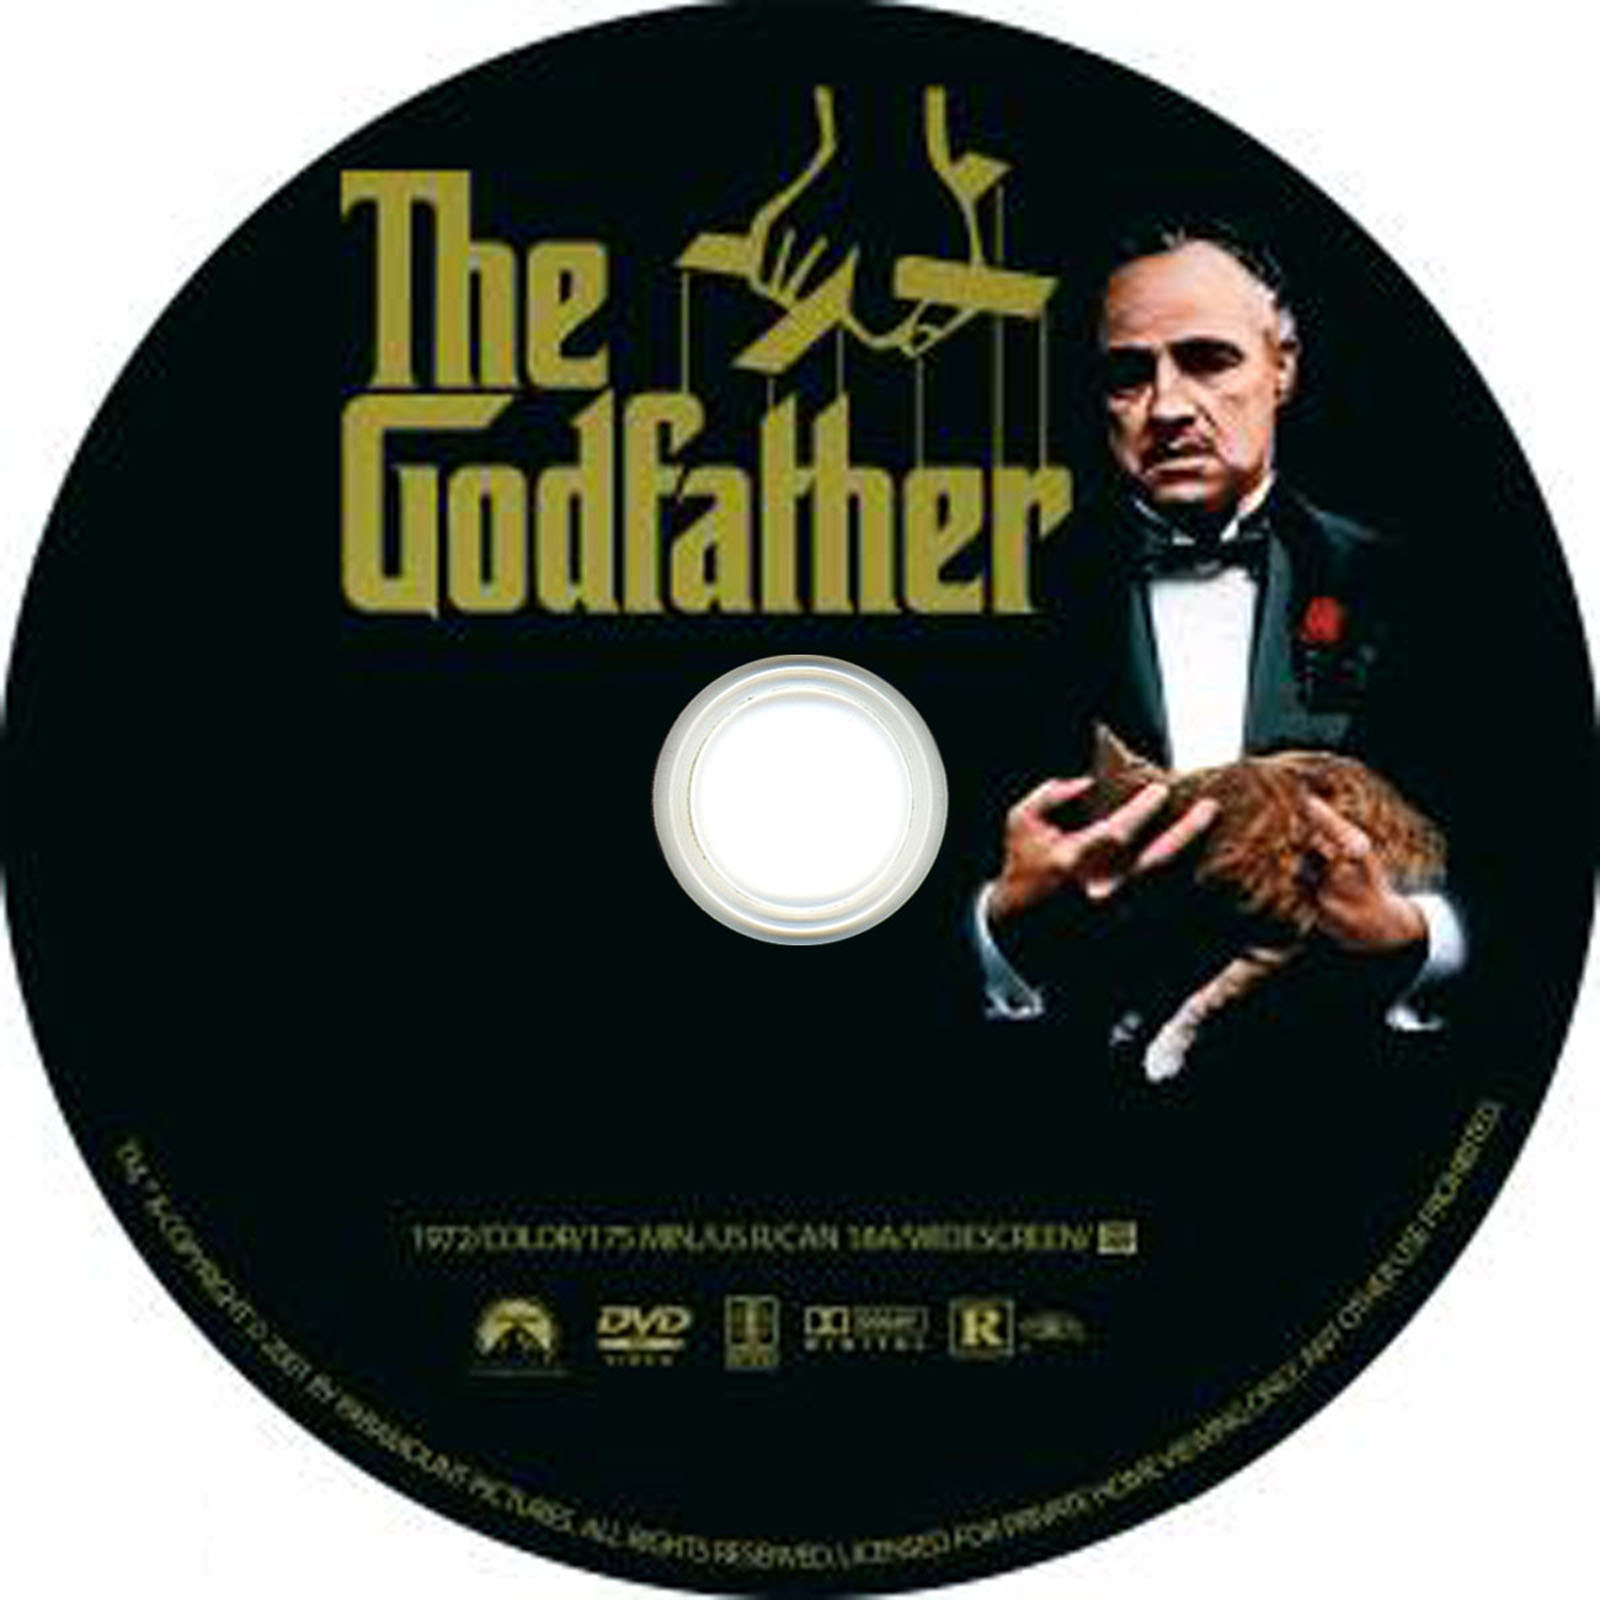 godfather movie 300mb free download